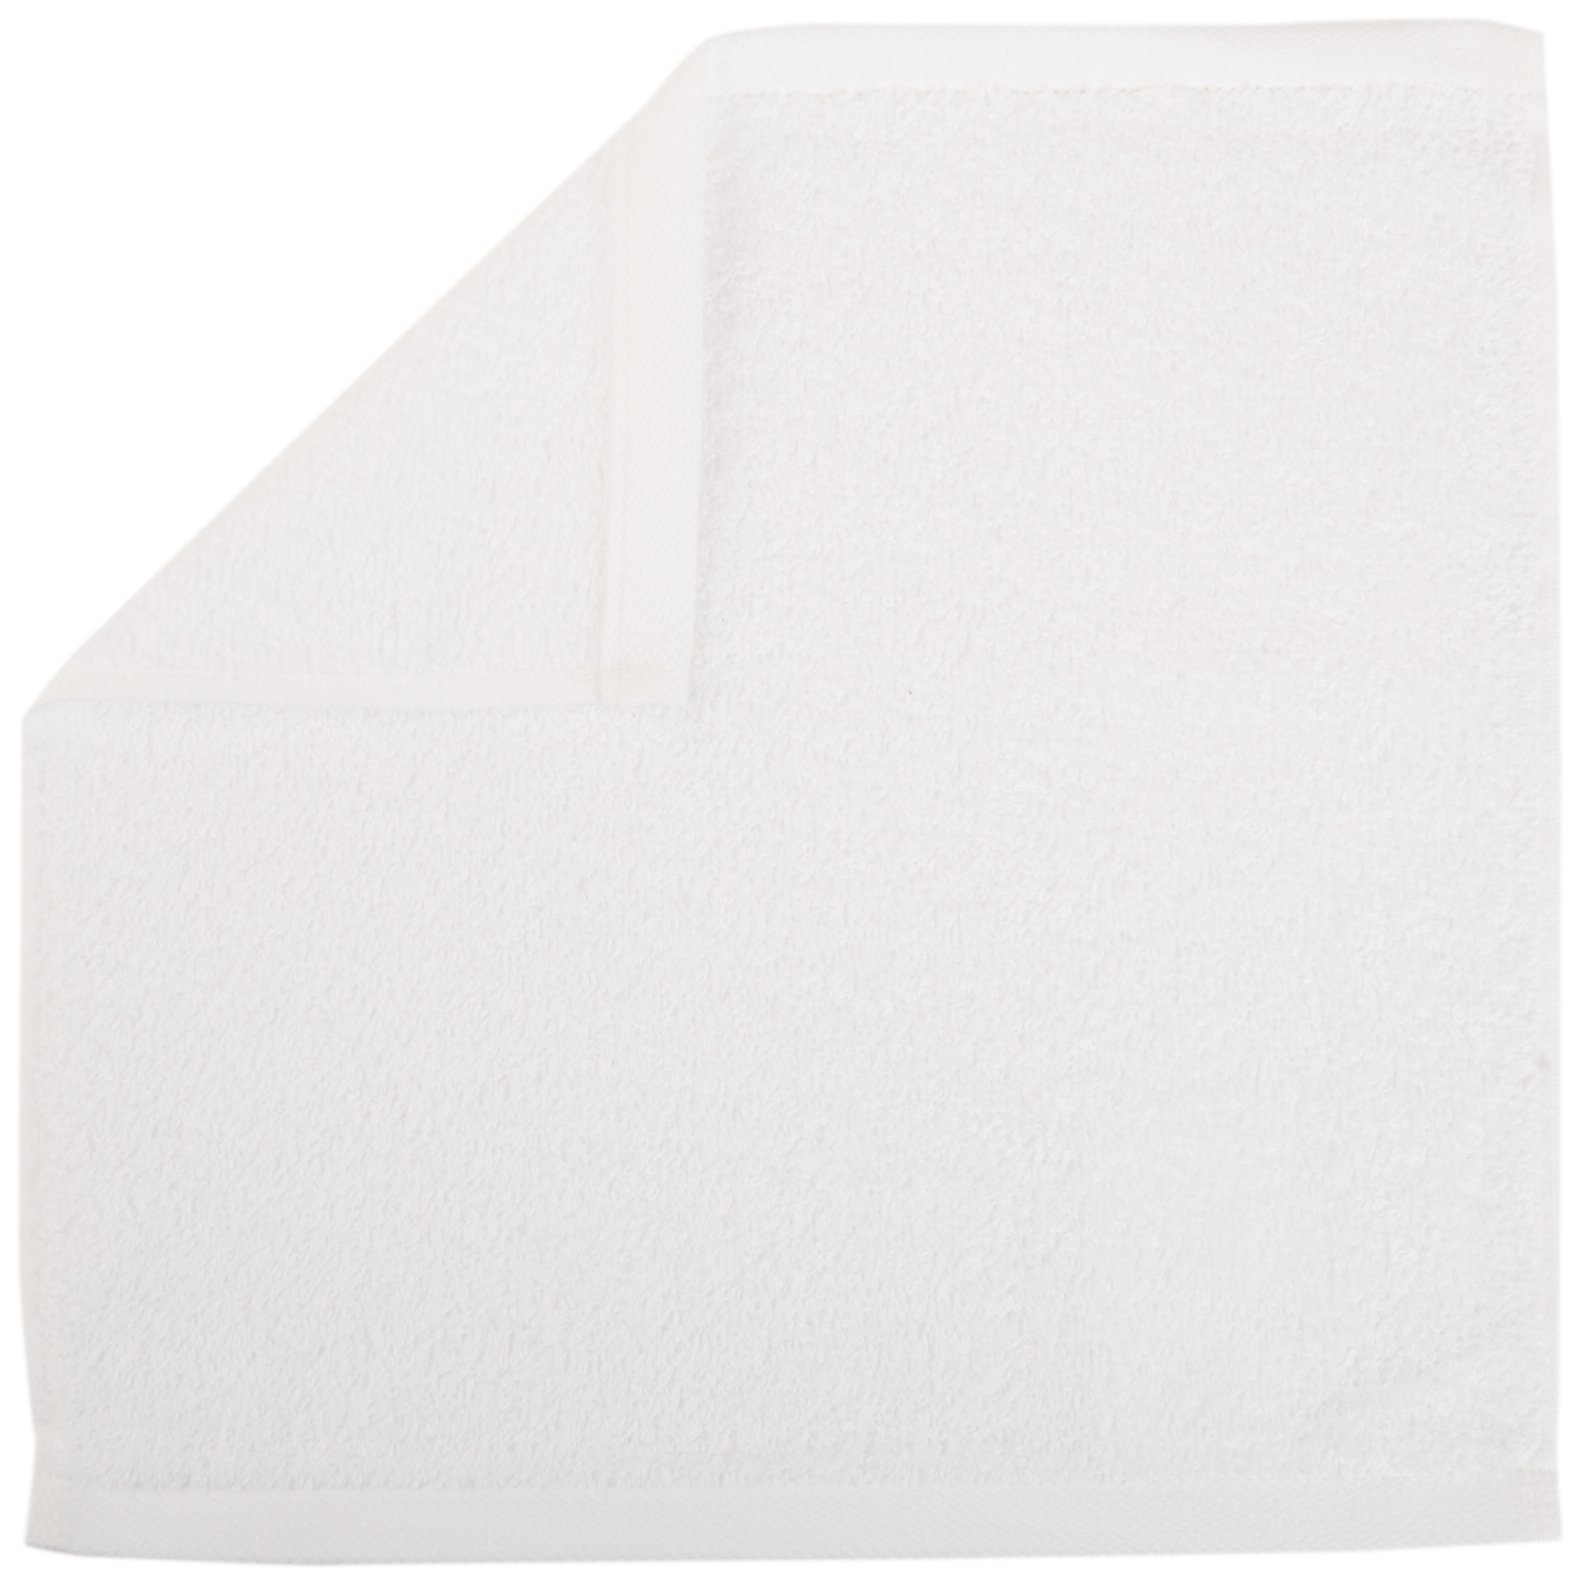 Amazon Basics Fast Drying Bath Towel, Extra Absorbent, Terry Cotton Washcloth, 12 x 12 Inch, White - Pack of 60